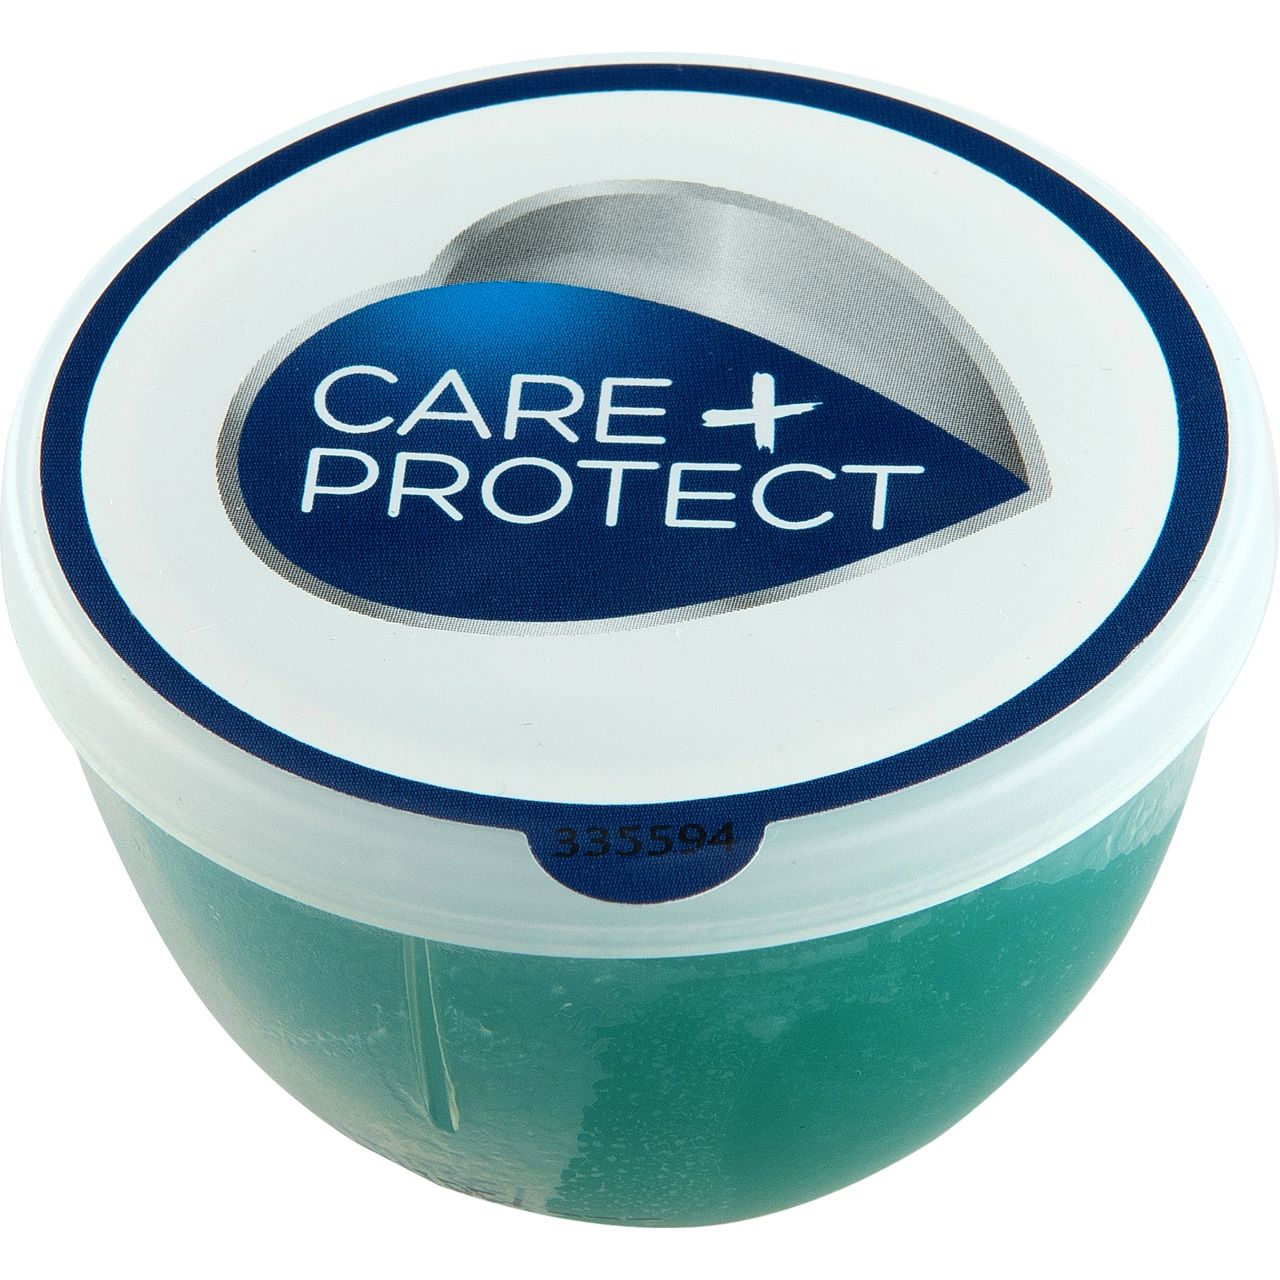 Care + Protect 35602001 Fridge Odour Filter Review